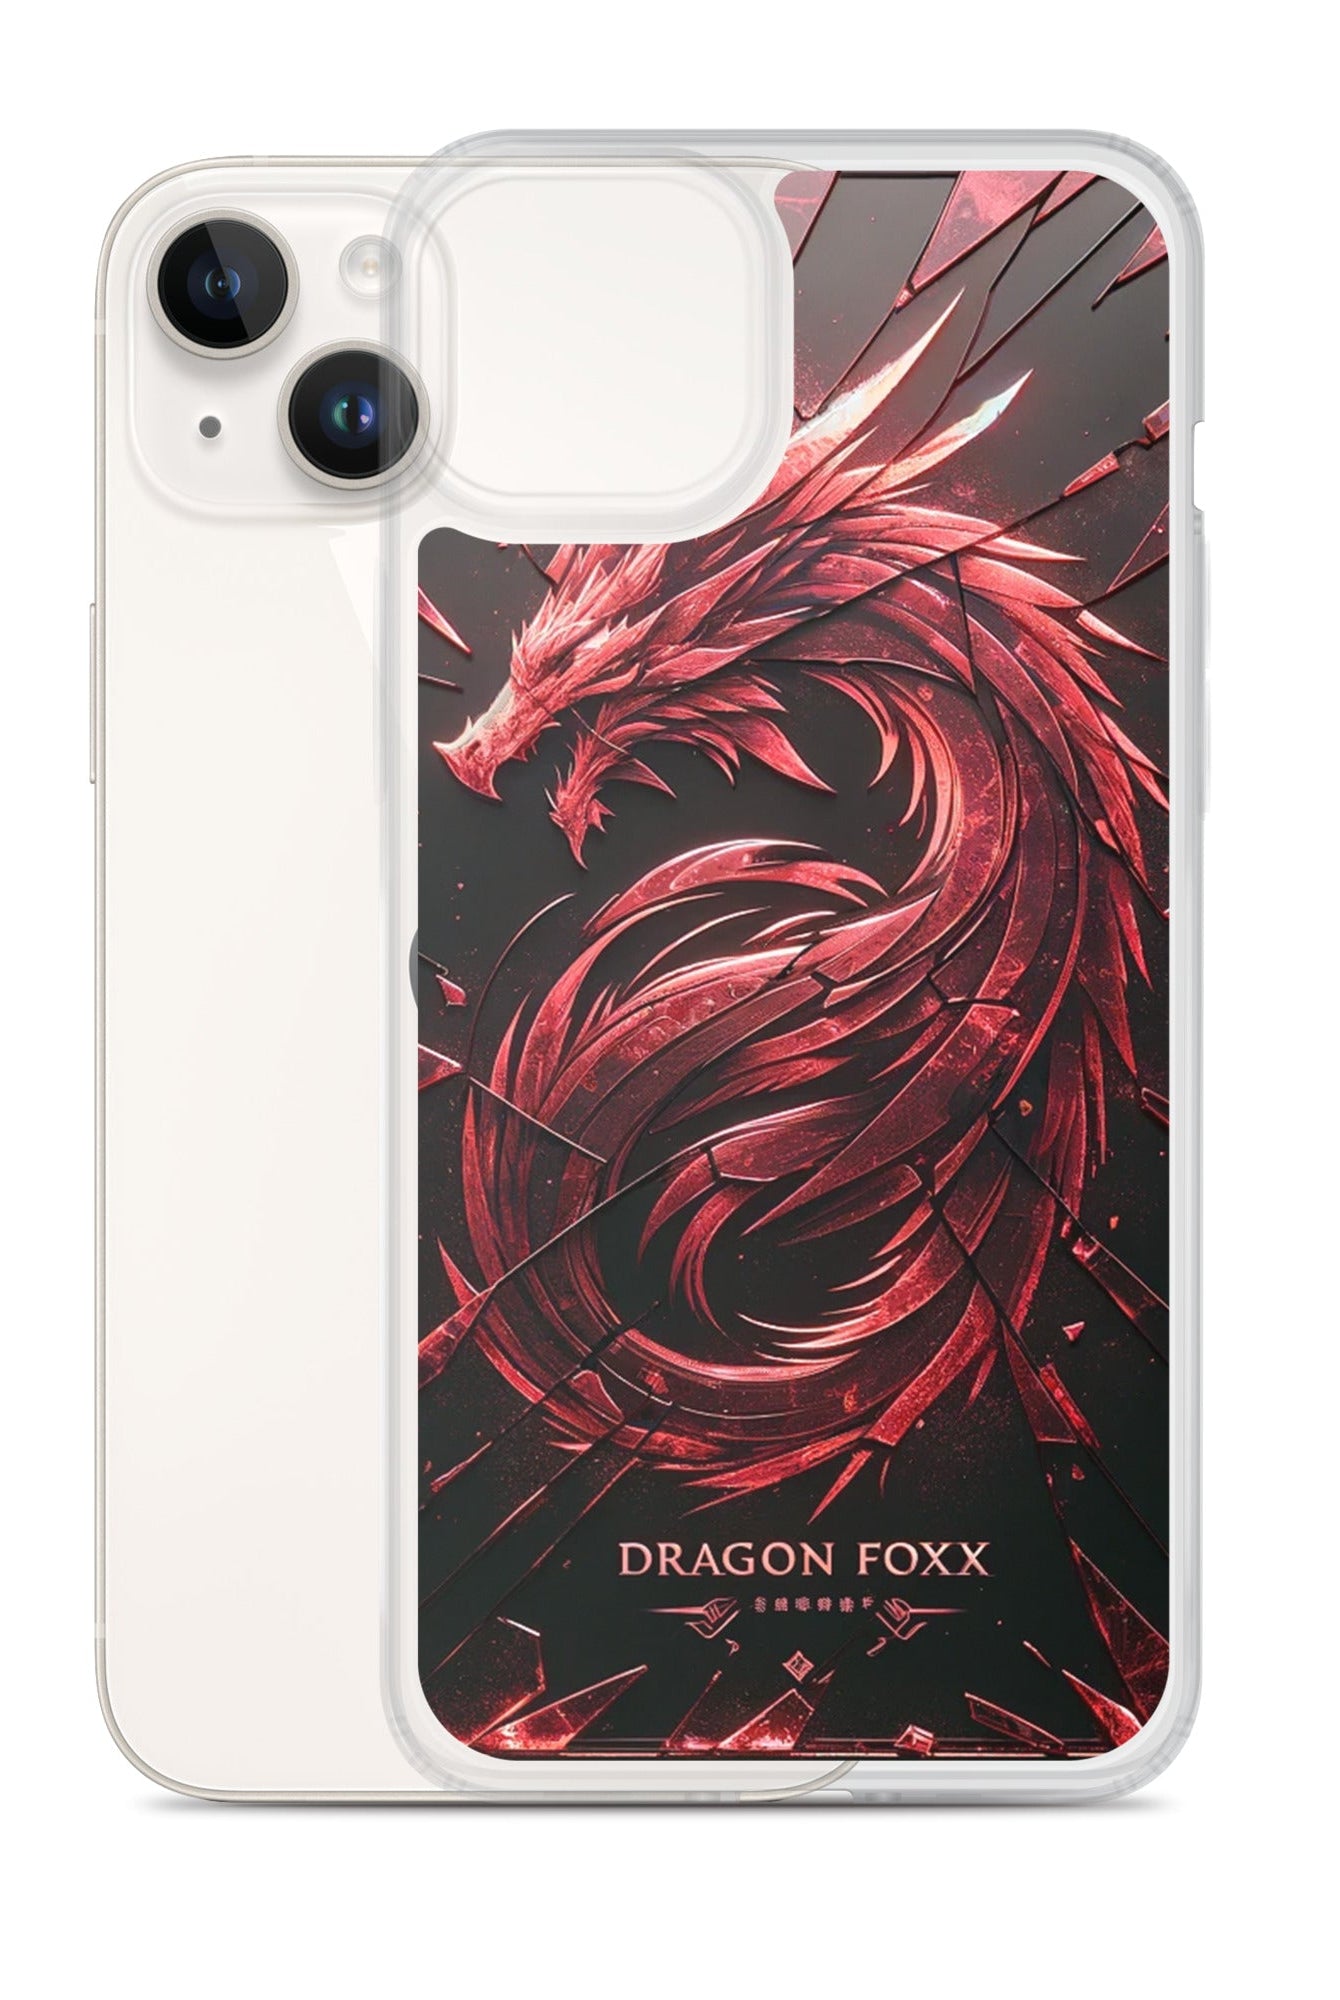 DRAGON FOXX™ Red Dragon Phone Case for iPhone® - Phone Case for iPhone® - DRAGON FOXX™ - DRAGON FOXX™ Red Dragon Phone Case for iPhone® - 7805351_16242 - iPhone 14 Plus - Red/Black/Clear - Accessories - Dragon Foxx™ - DRAGON FOXX™ Phone Case for iPhone®